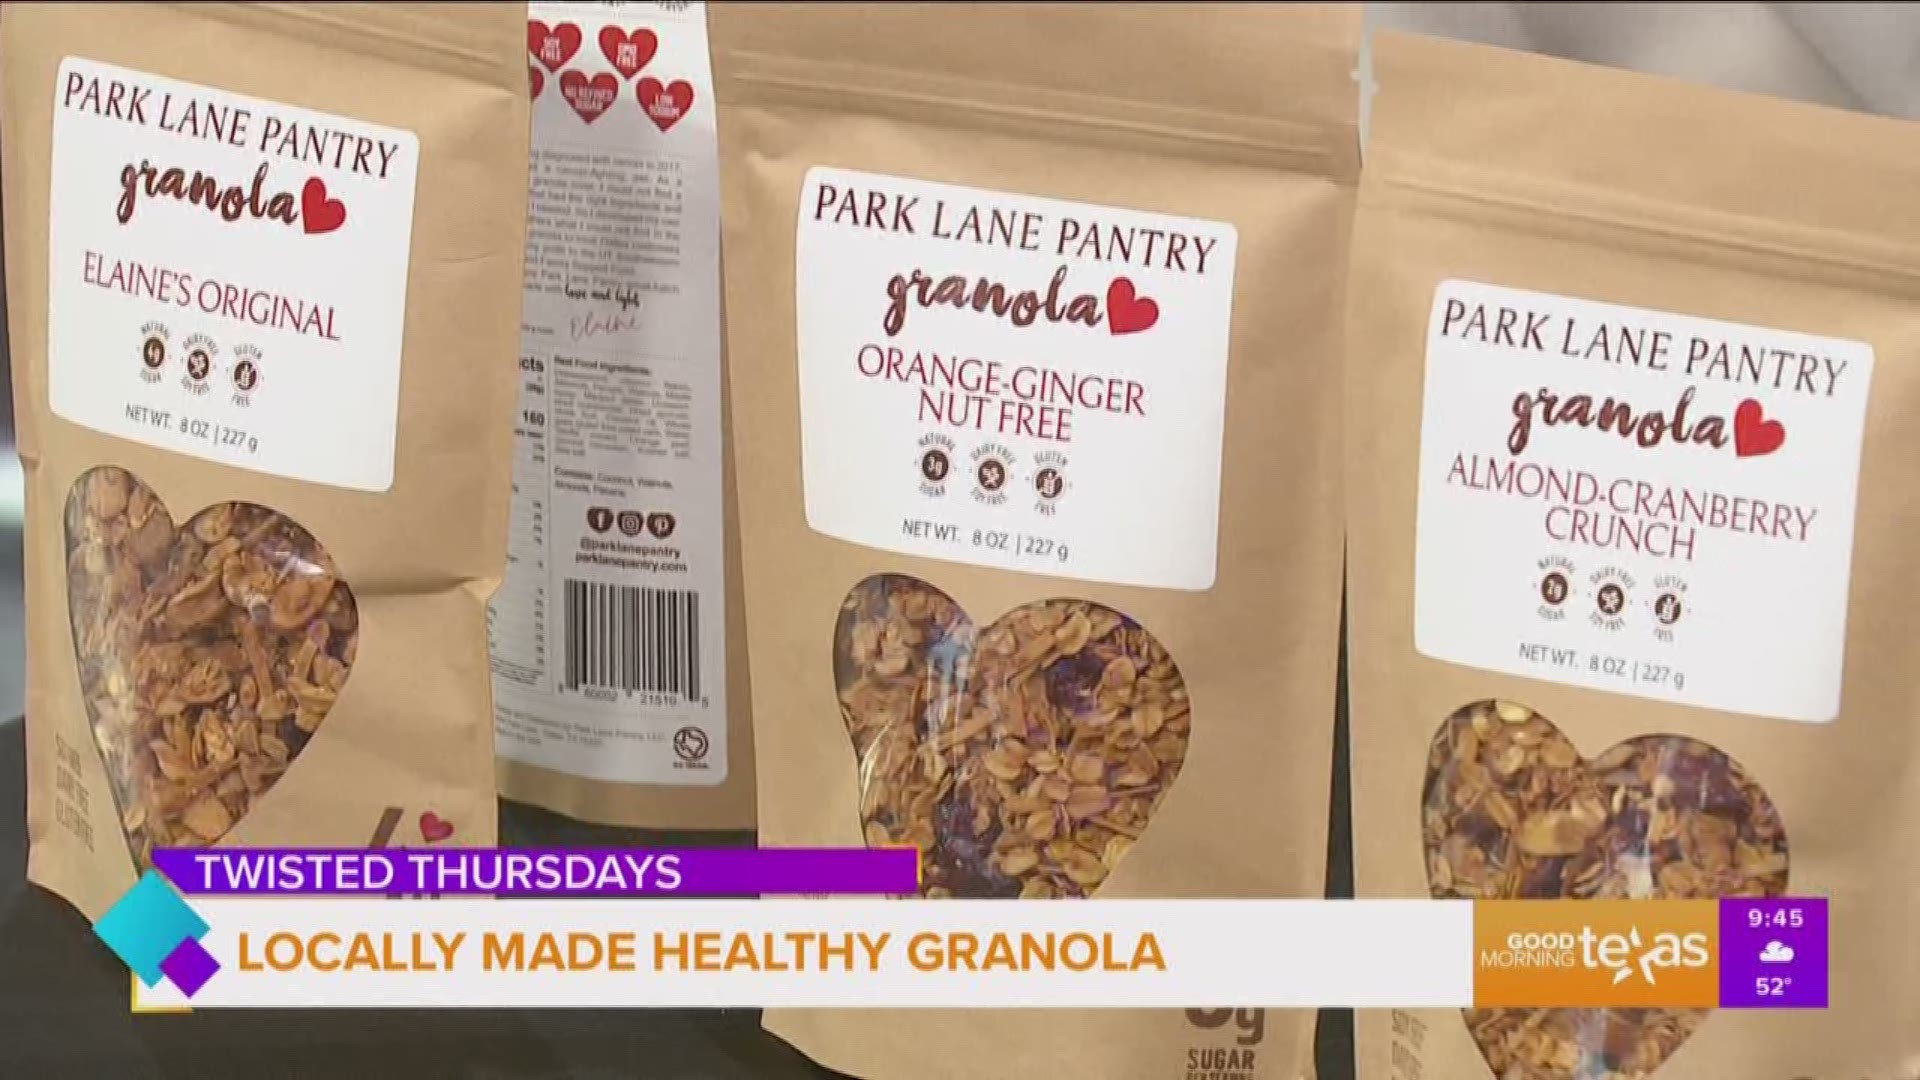 You can find Park Lane Pantry granola snacks at Central Market.  For more information go to www.parklanepantry.com.